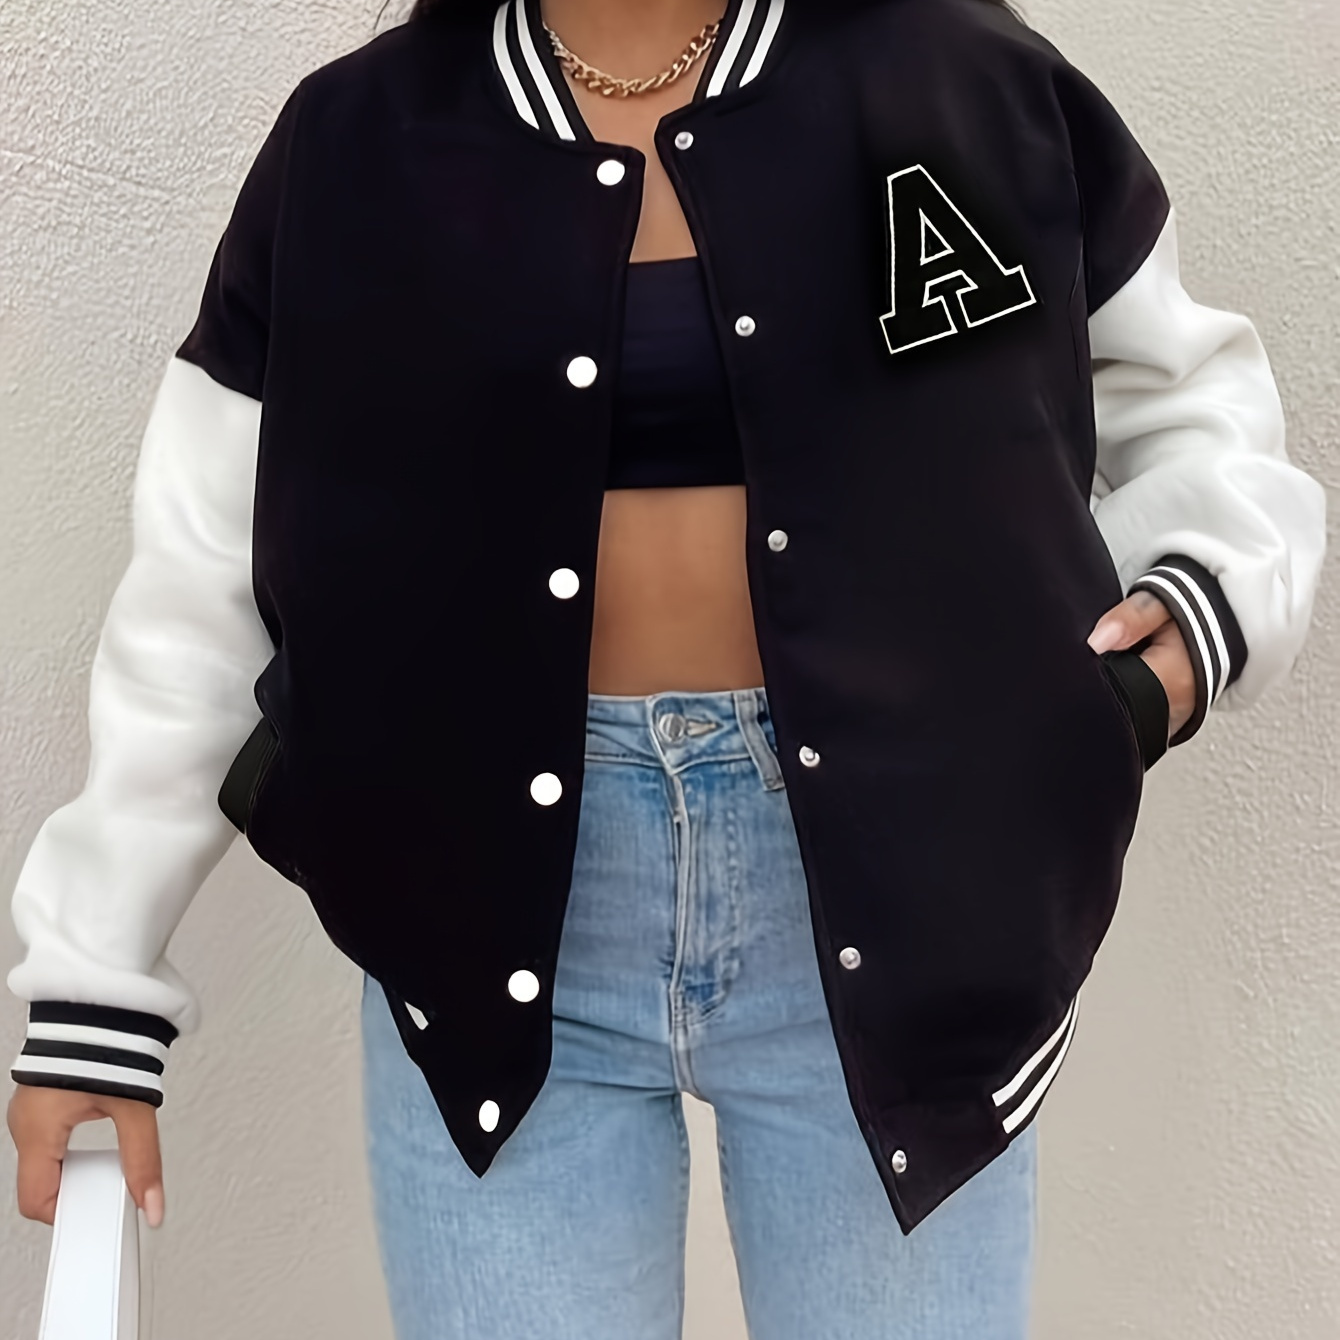 

Color Block Letter Print Bomber Jacket, Casual Crop Button Front Pockets Jacket, Women's Clothing